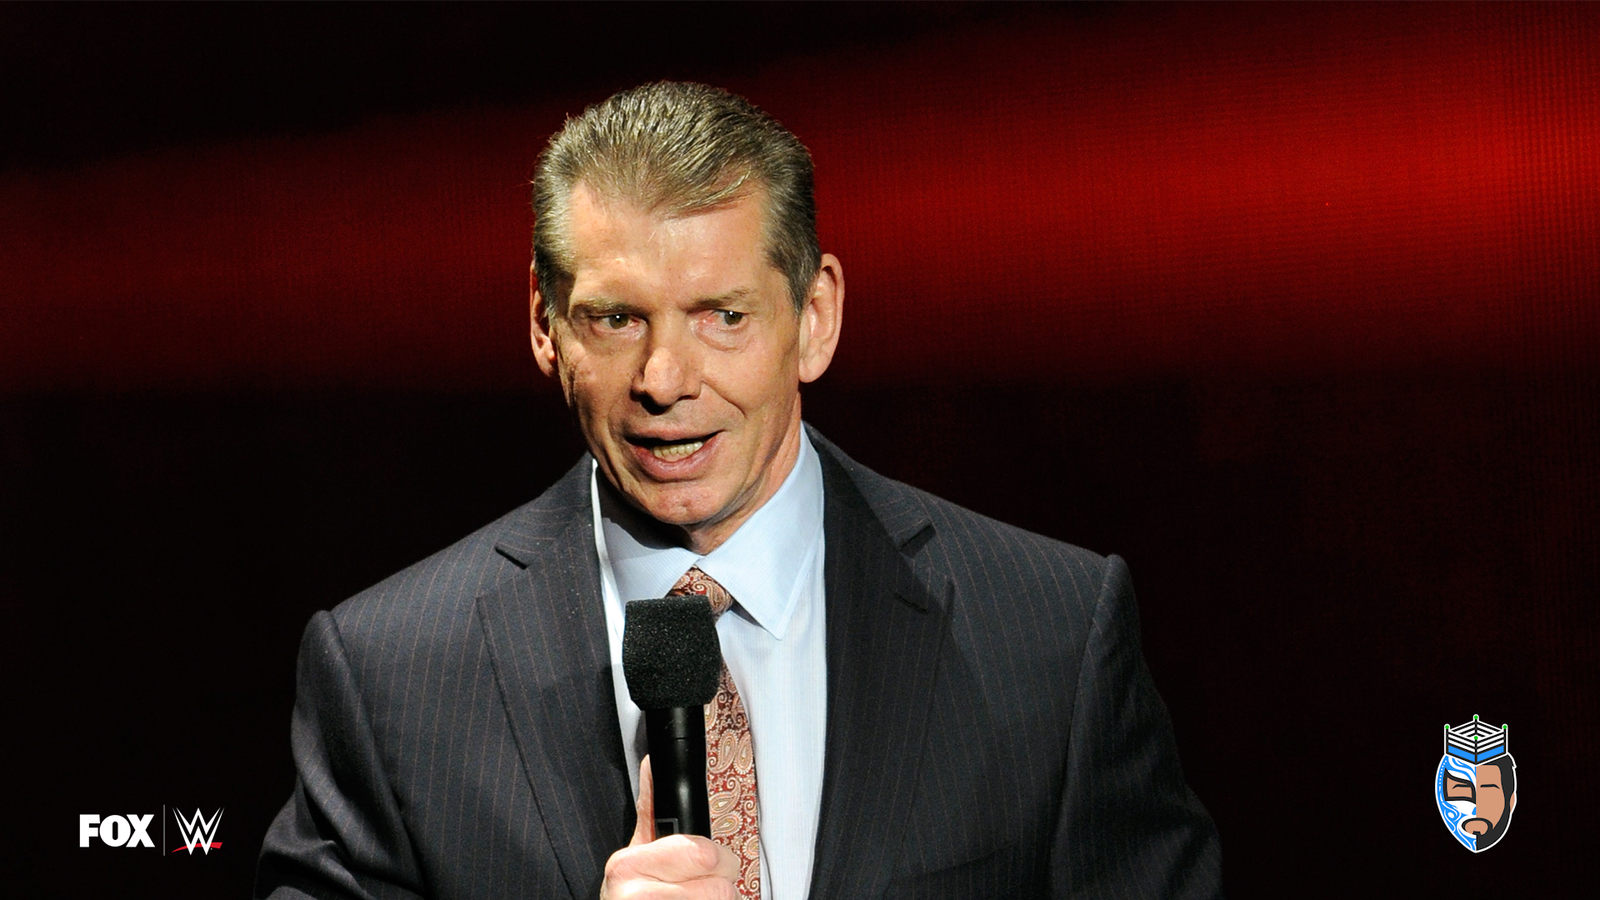 Vince McMahon announces retirement, Ryan Satin reacts and looks ahead